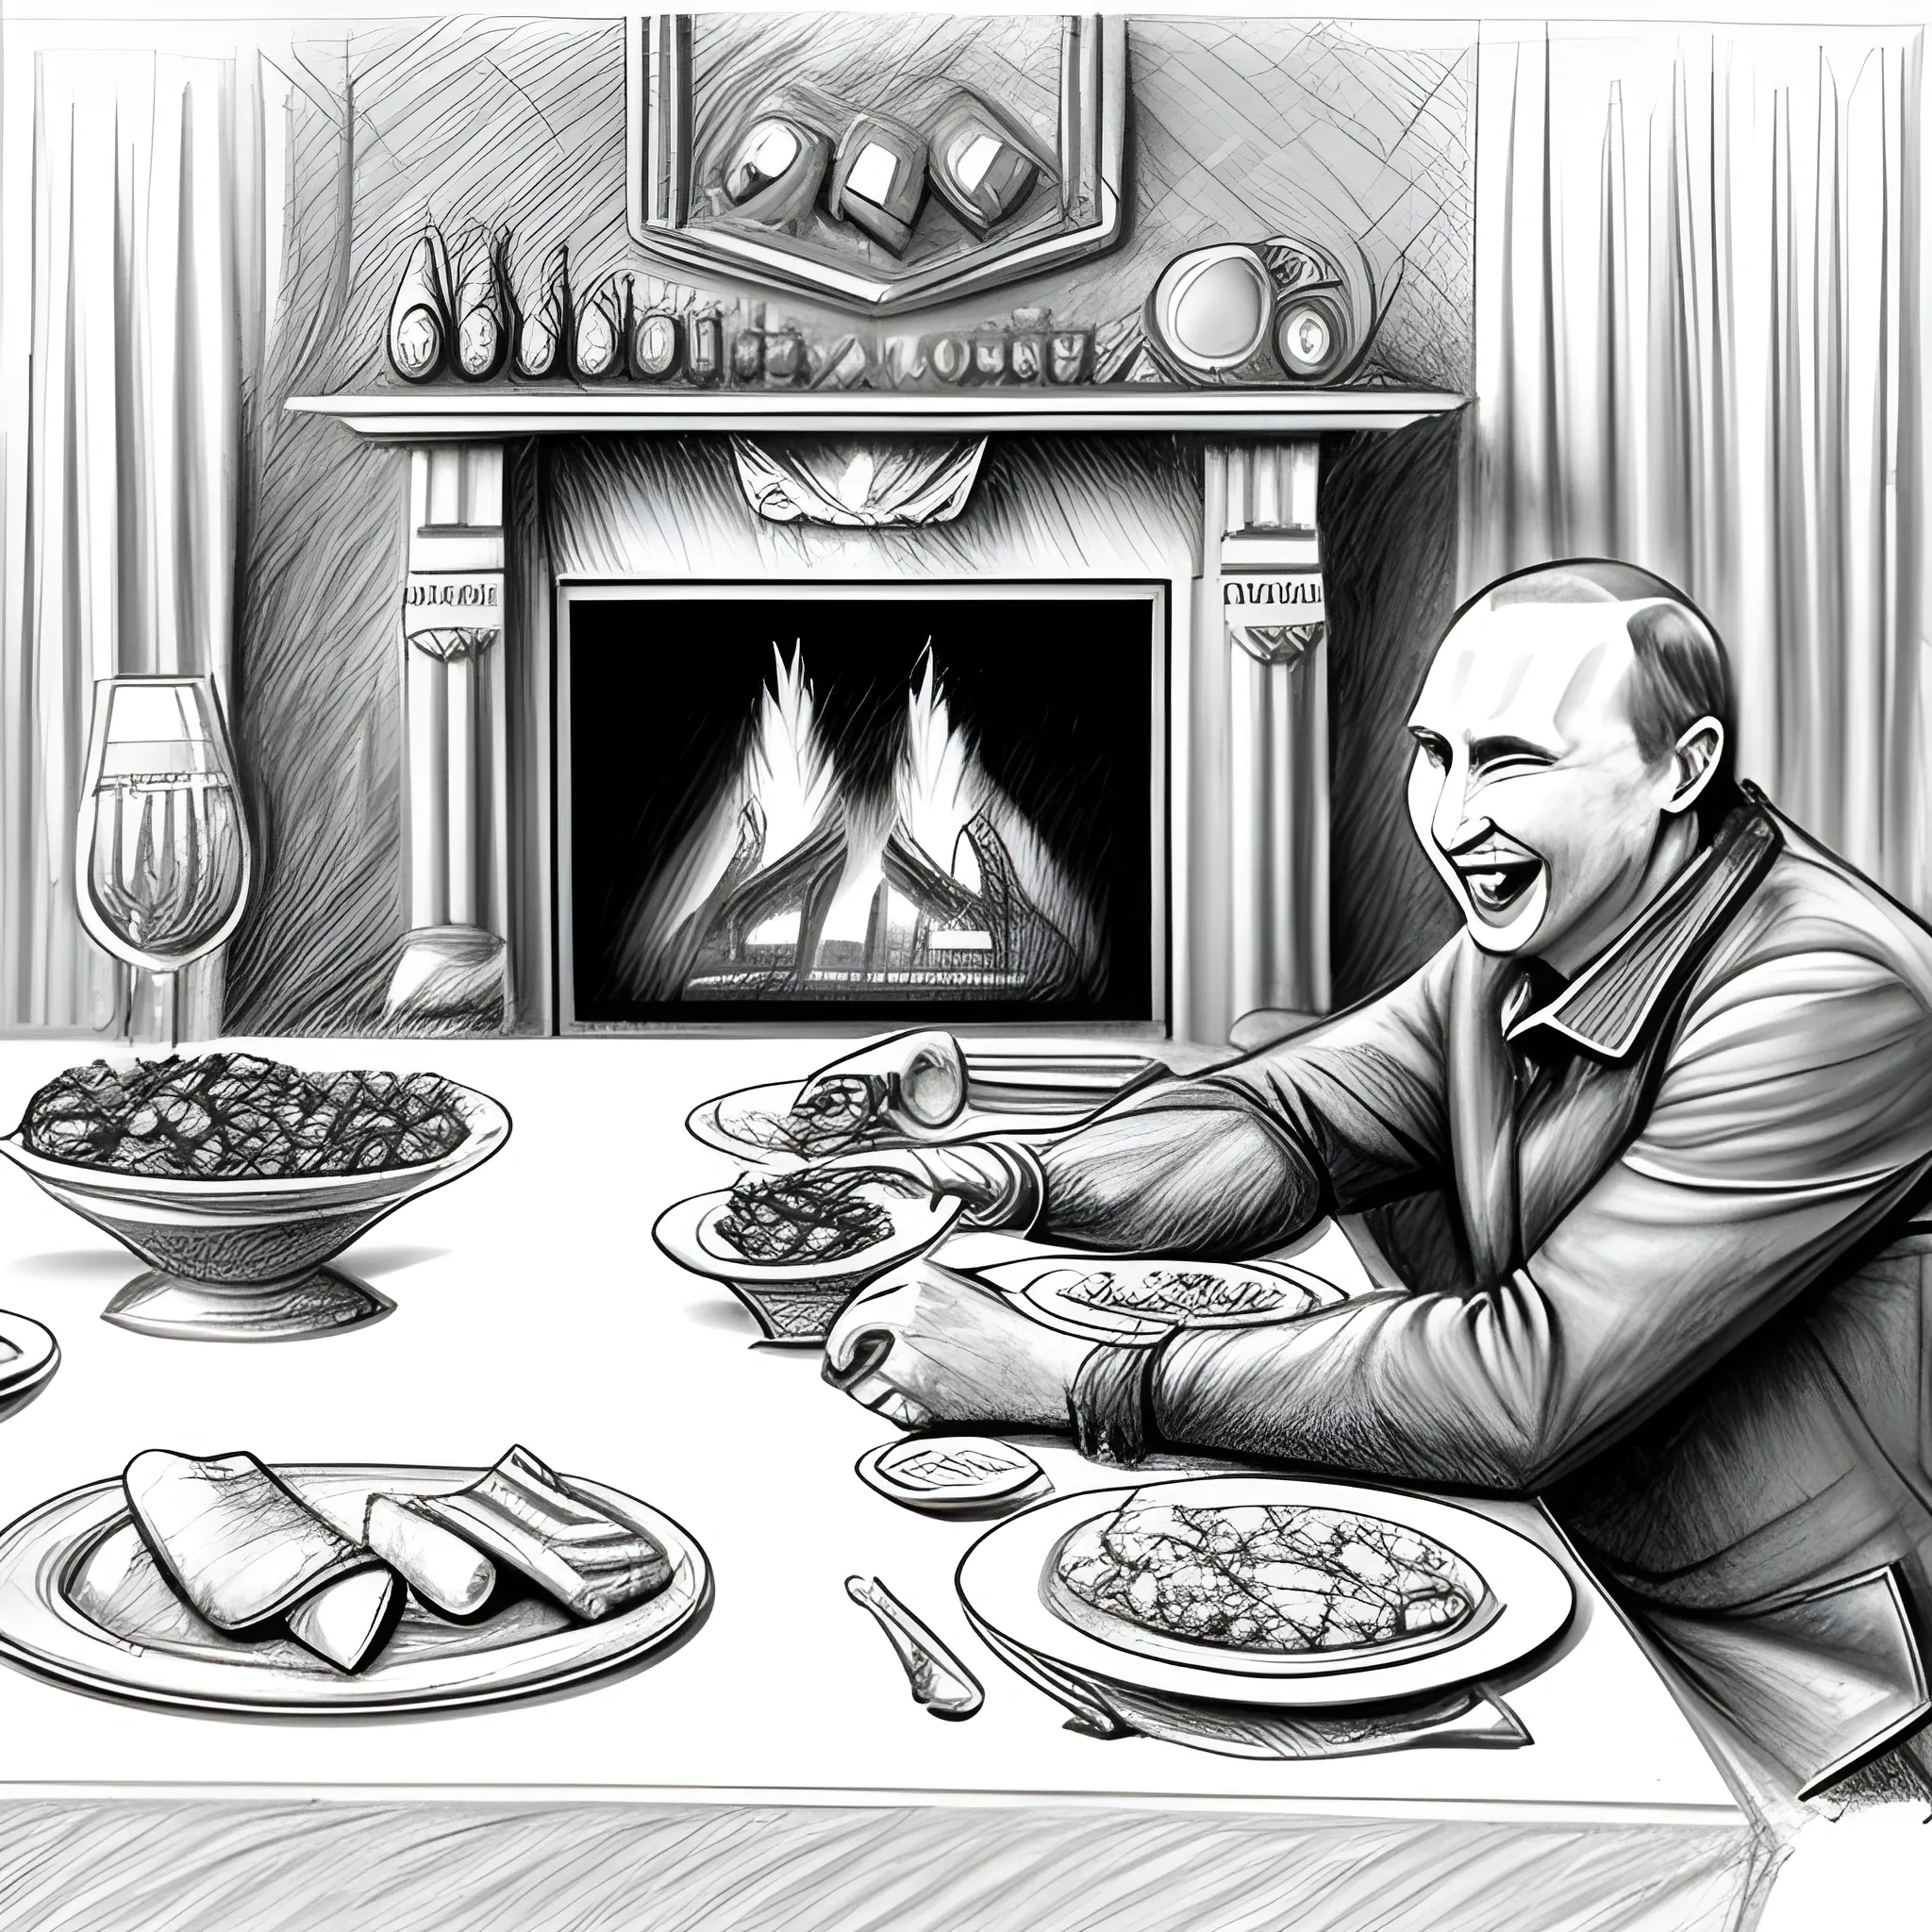 , Pencil Sketch putin laughing by the fireplace with table full of food